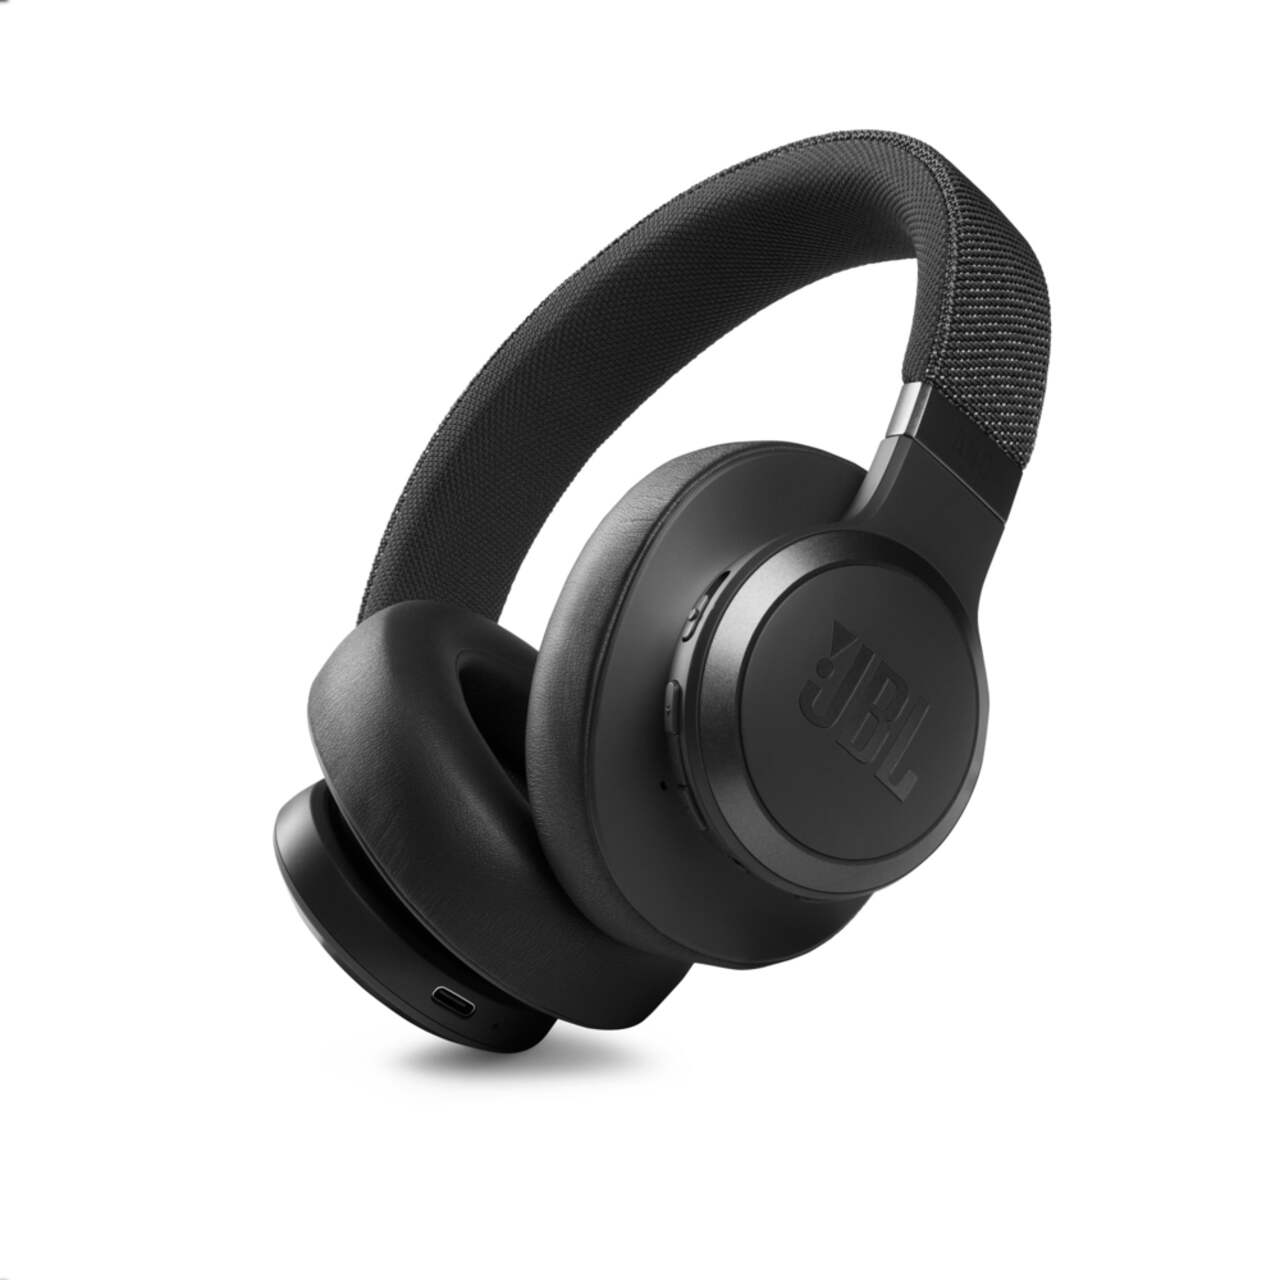 https://media-www.canadiantire.ca/product/living/electronics/home-entertainment-accessories/5740627/jbl-live-660nc-bluetooth-headphones-1df290a2-3413-44fd-b846-4d56c505ef25.png?imdensity=1&imwidth=640&impolicy=mZoom